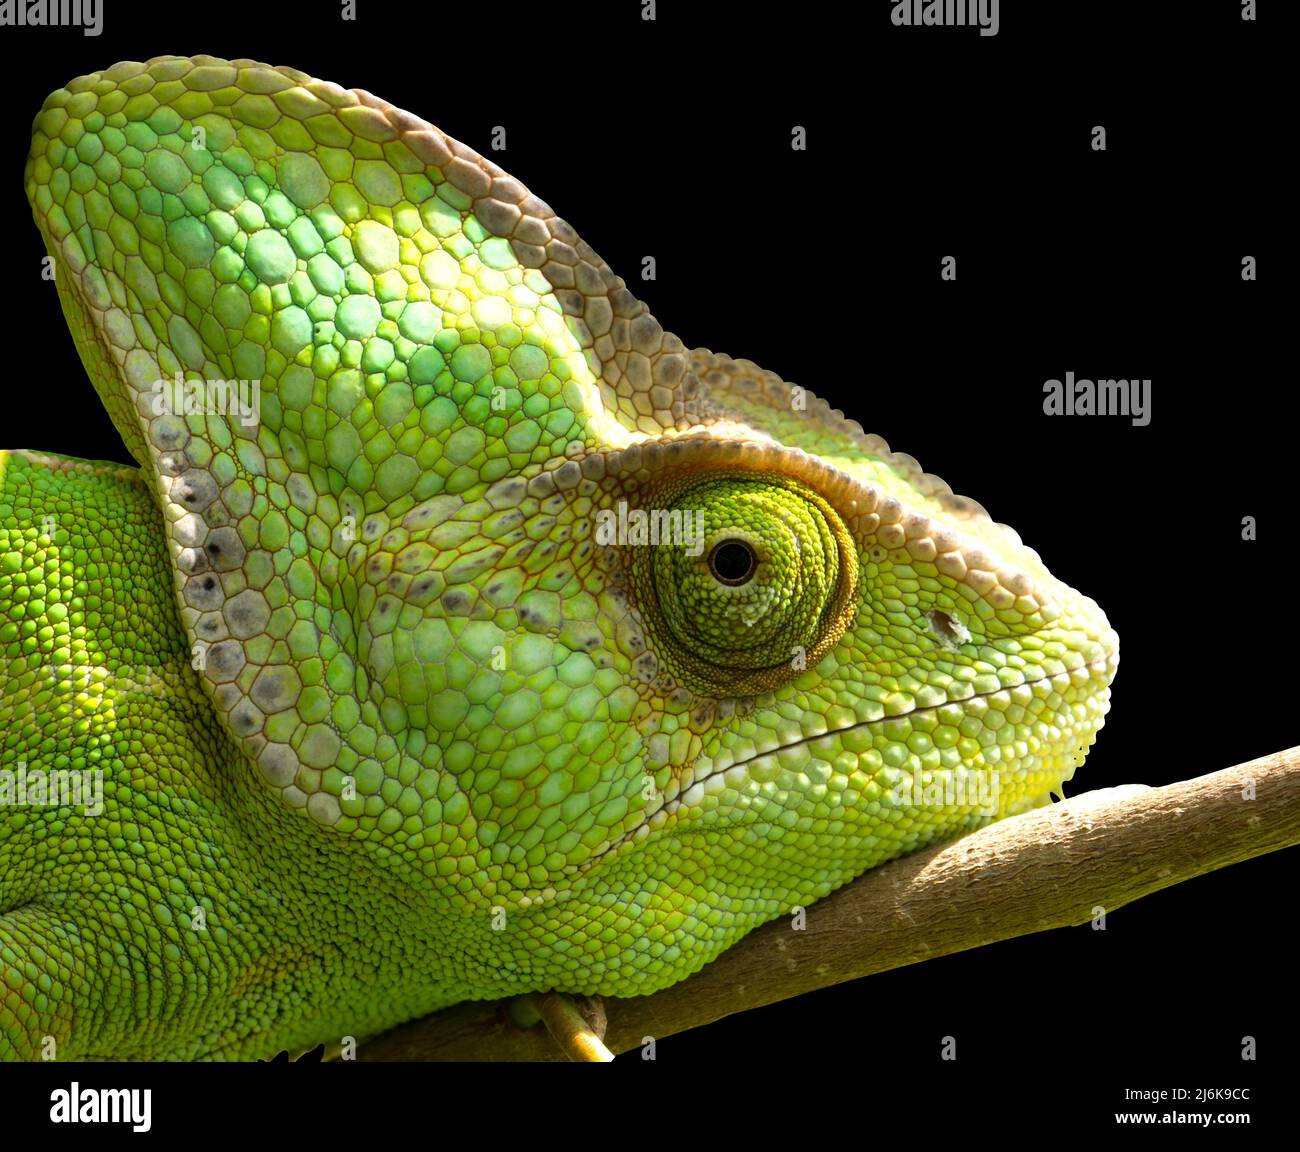 Chameleon lies with head on branch on isolated black background. Female yemen Chameleon looking ahead. Stock Photo